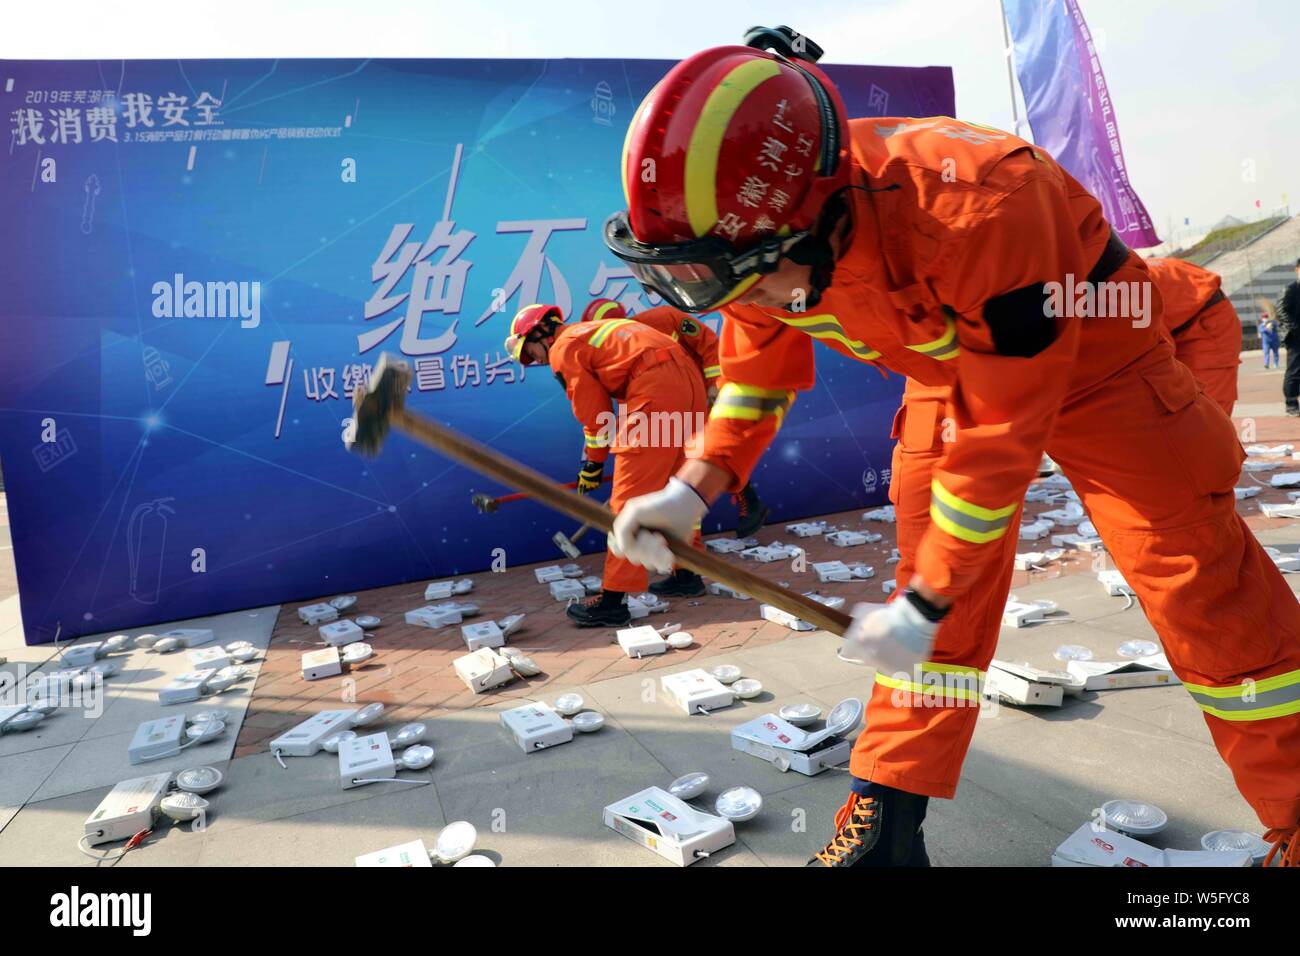 Chinese firefighters smash counterfeits of fire extinguishers on the World Consumer Rights Day, often referred to as '315' in China, in Changde city, Stock Photo